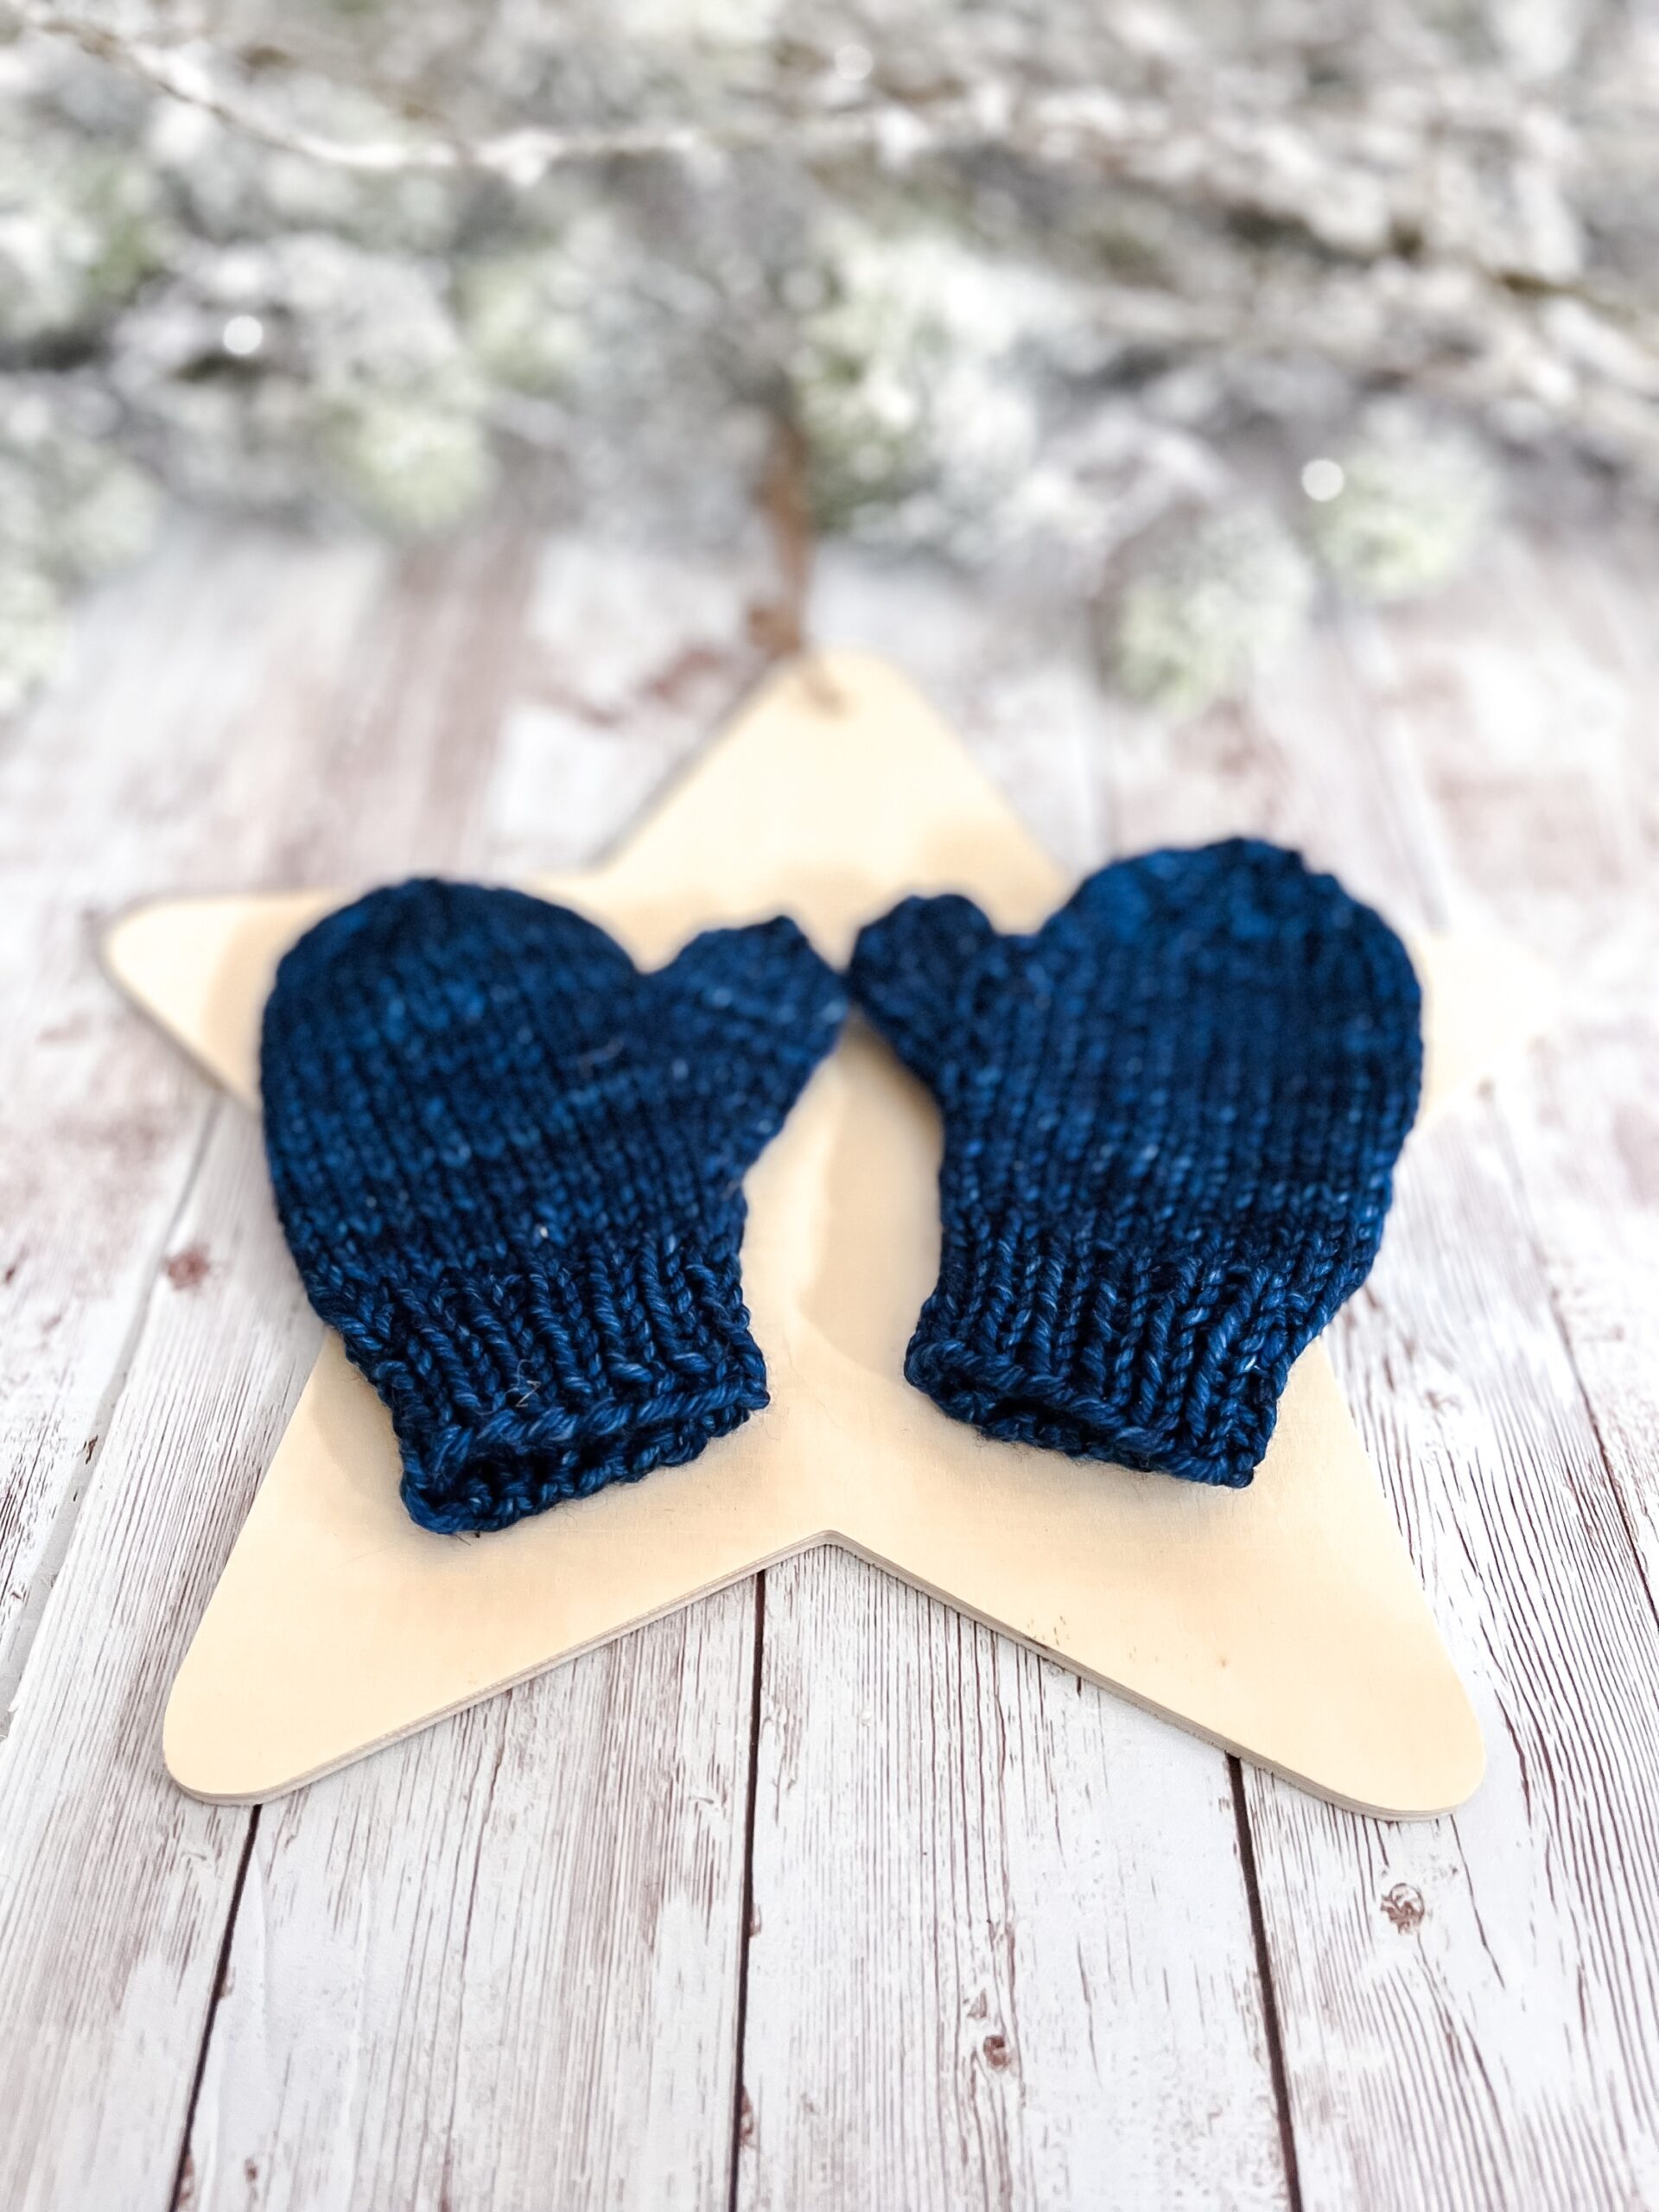 A pair of dark blue colored mittens rests on a wooden star cutout on a wood plank background. In the background of the photo is snow covered pine branches